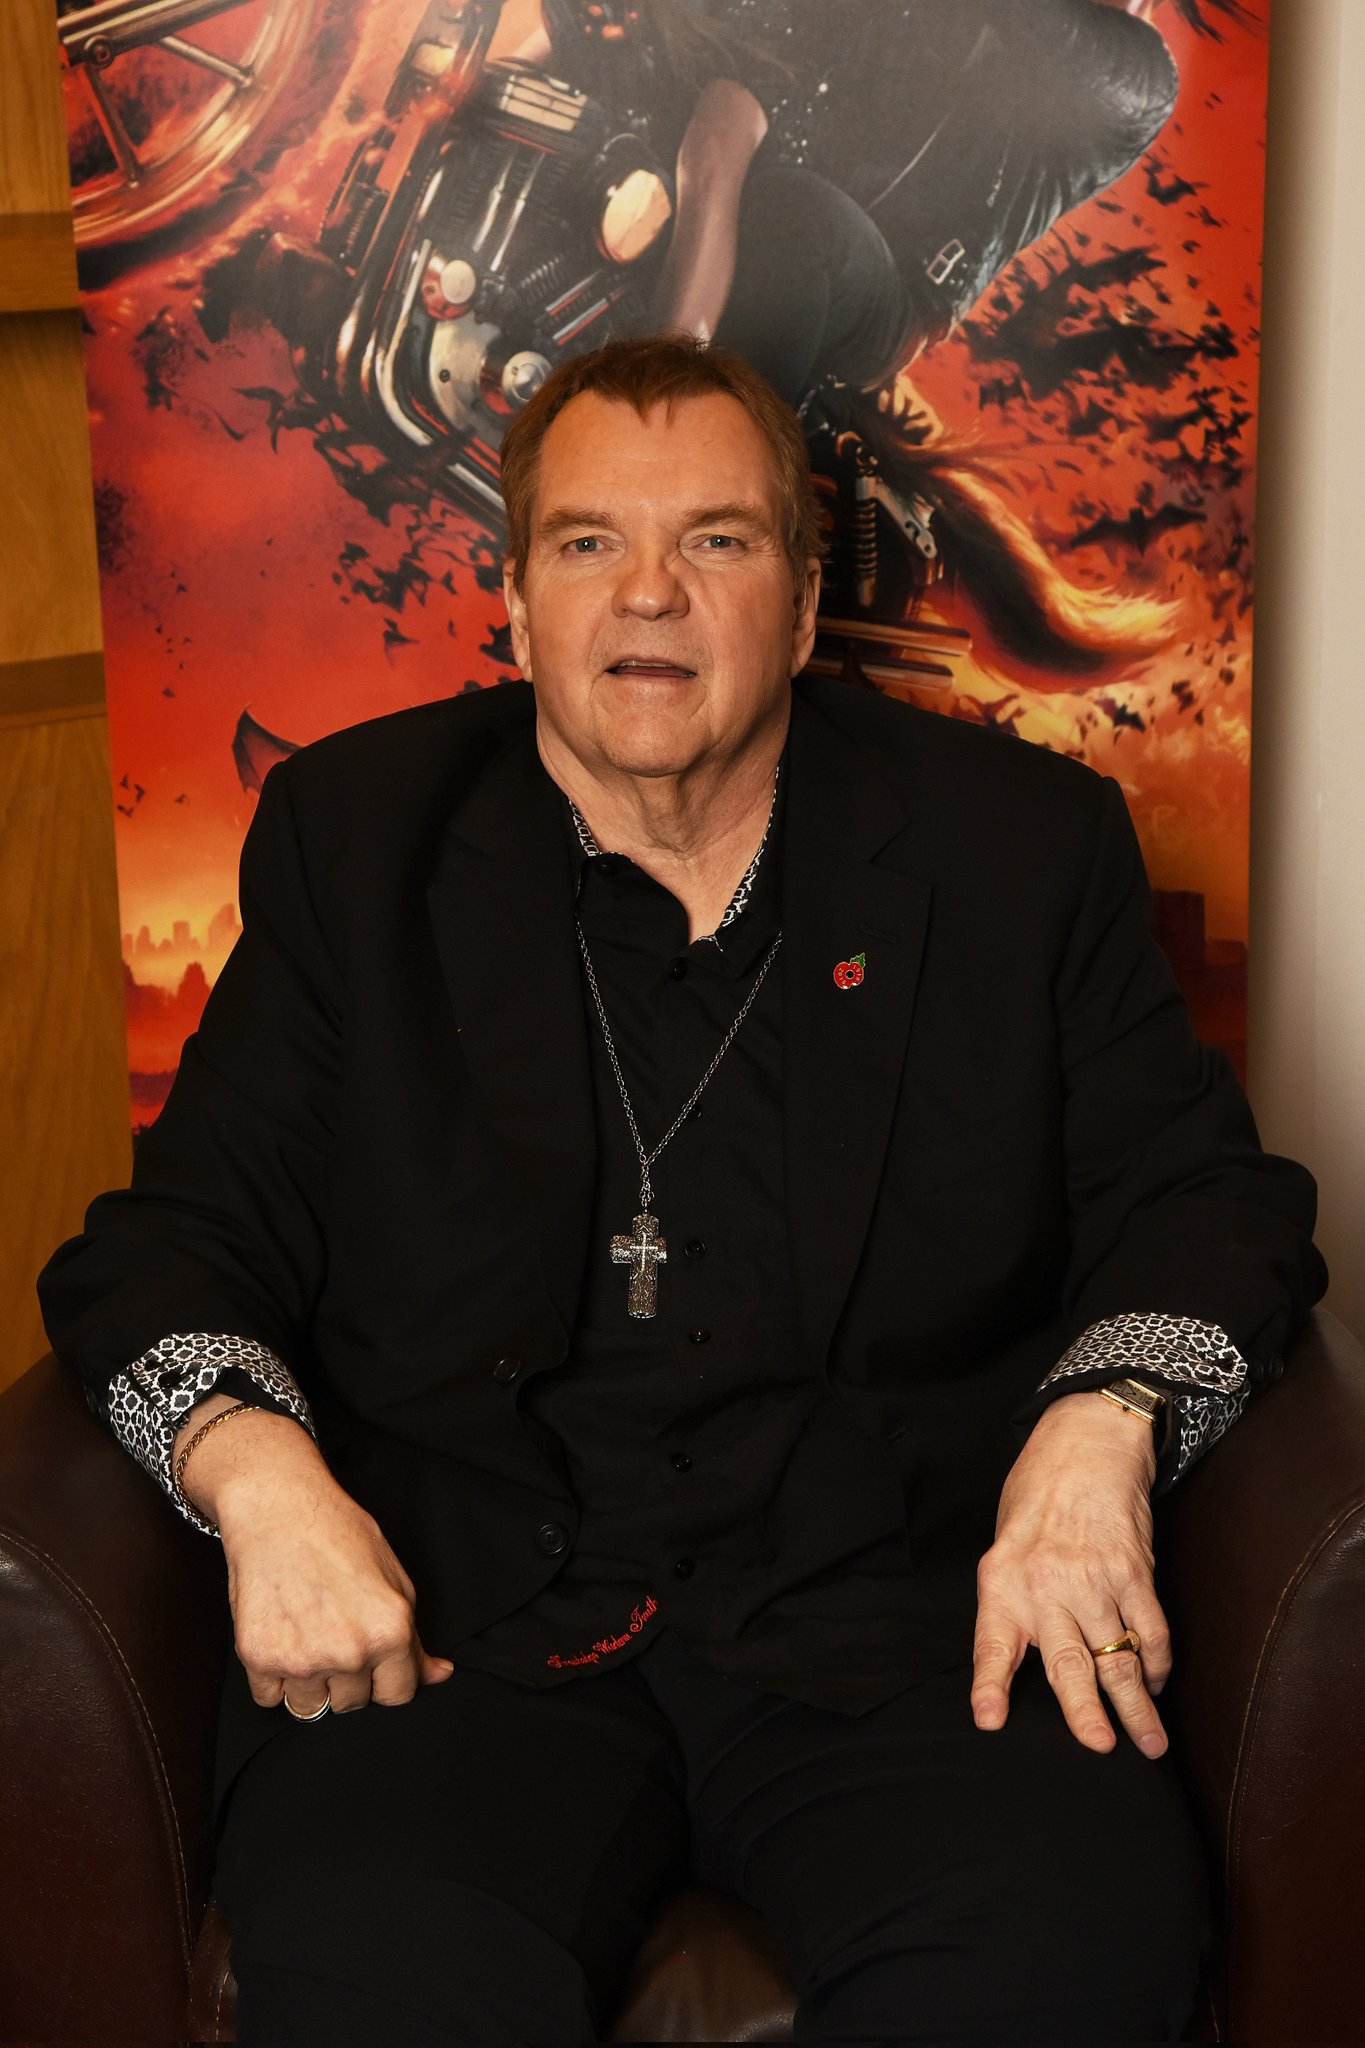 Happy Birthday to the late Meat Loaf who would\ve turned 75 today. 